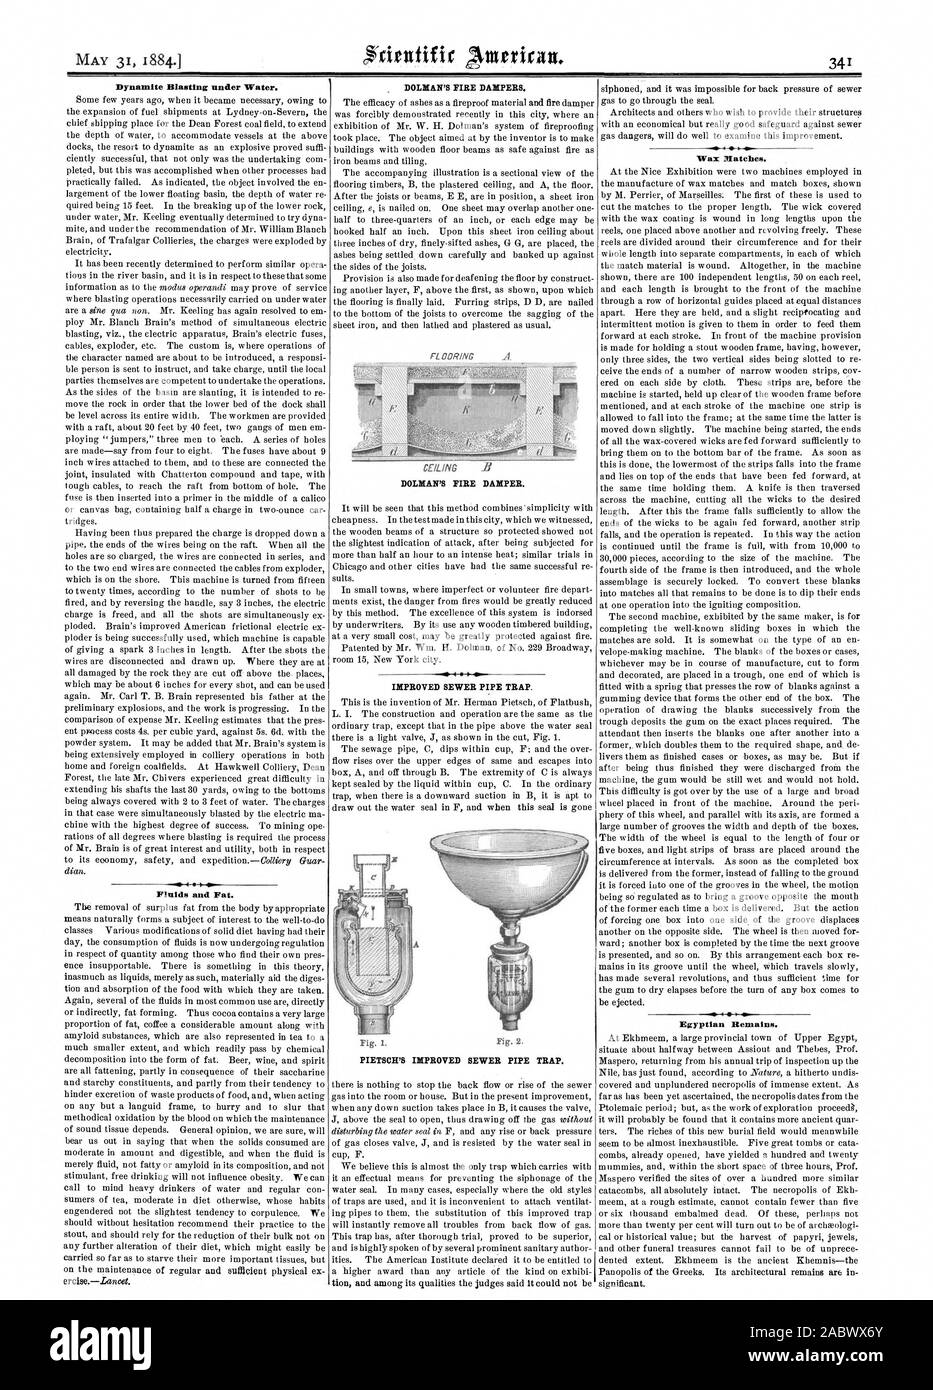 Dynamite Blasting under Water. Fluids and Fat. DOLMAN'S FIRE DAMPERS. IMPROVED SEWER PIPE TRAP. PIETSCH'S IMPROVED SEWER PIPE TRAP. Wax Matches. Egyptian Remains. DOLMAN'S FIRE DAMPER., scientific american, 1884-05-31 Stock Photo